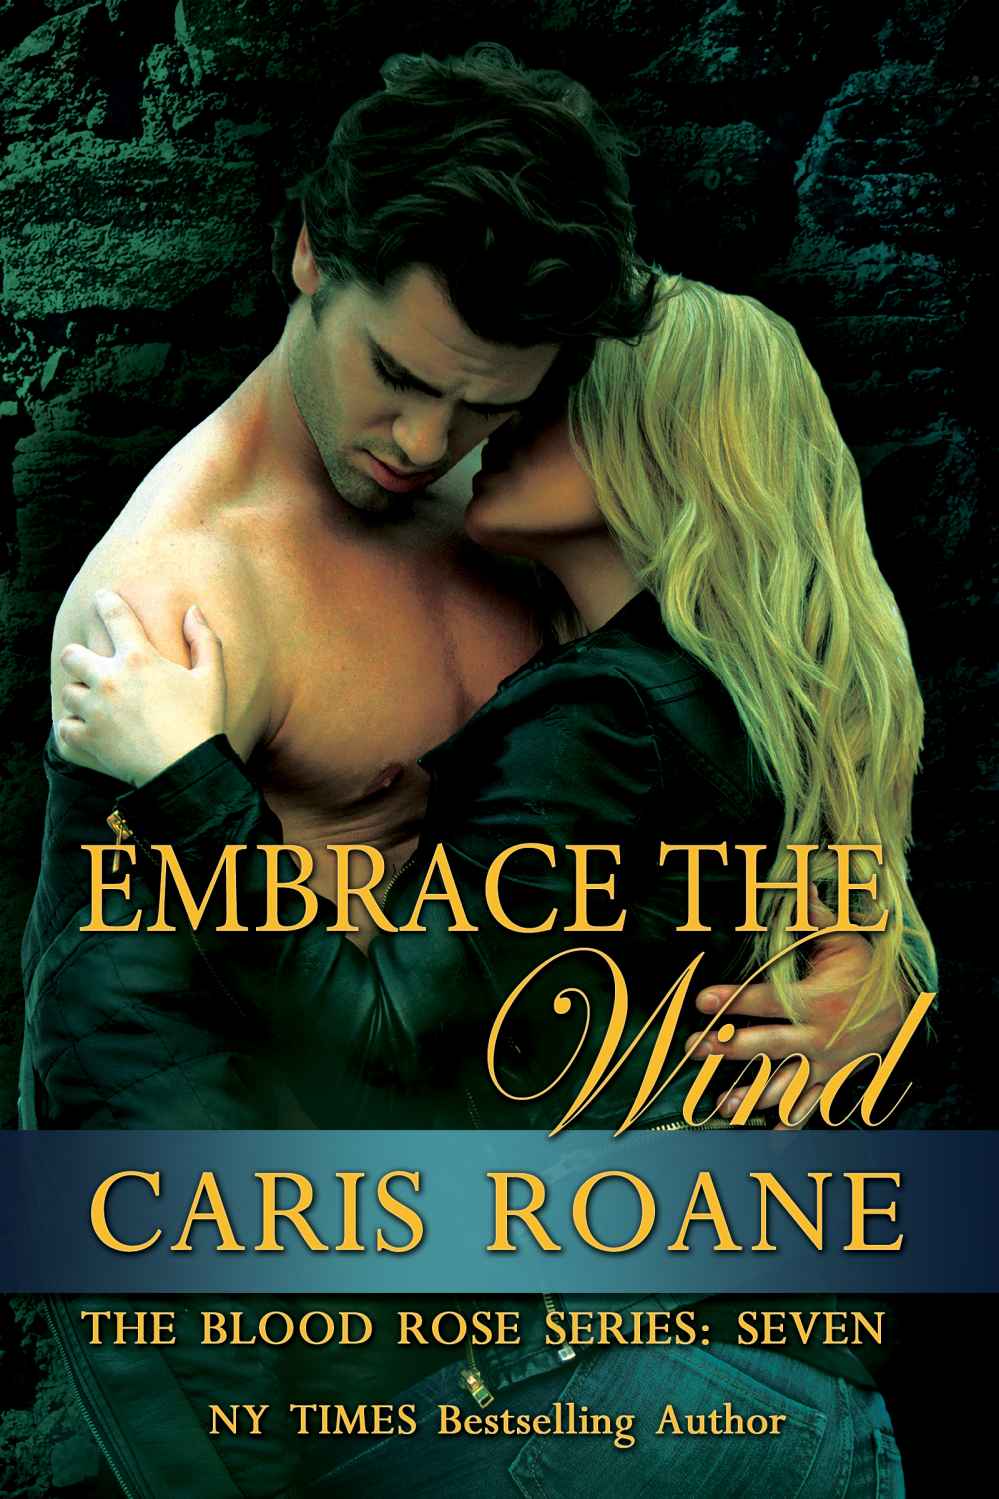 Embrace the Wind by Caris Roane